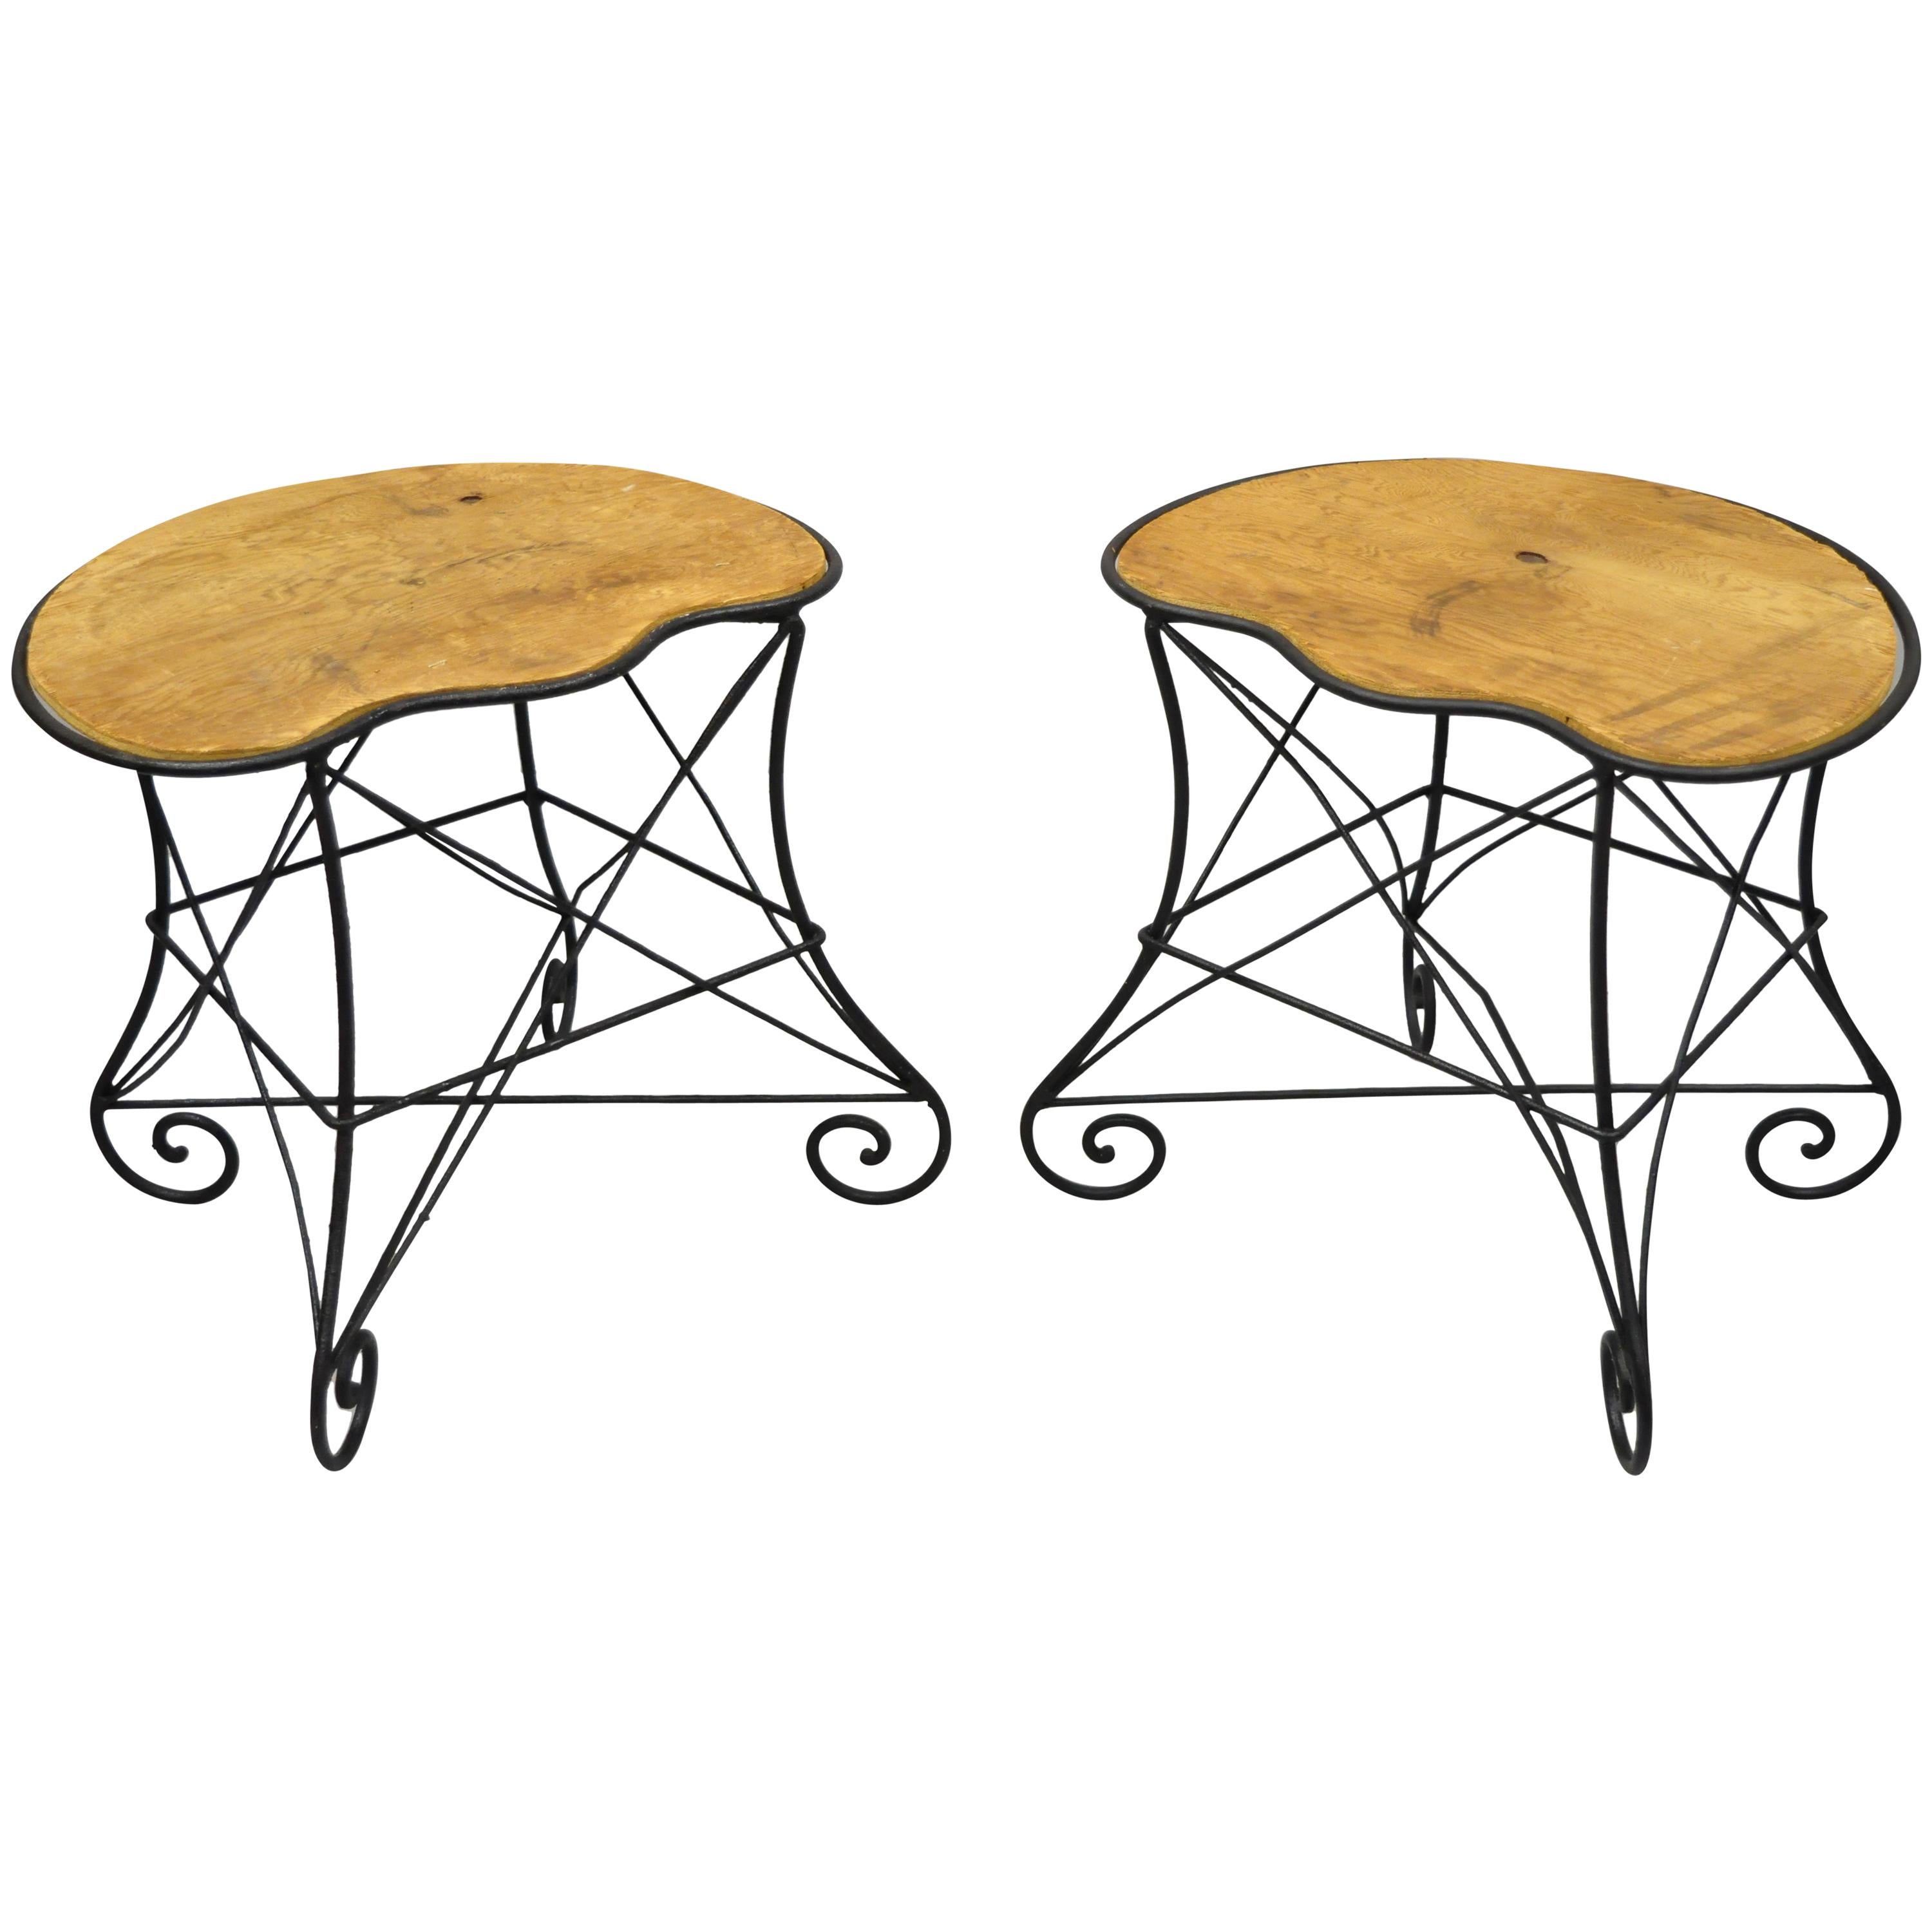 Pair of Art Nouveau Style Stool Bench Seats with Scrolling Wrought Iron Frame